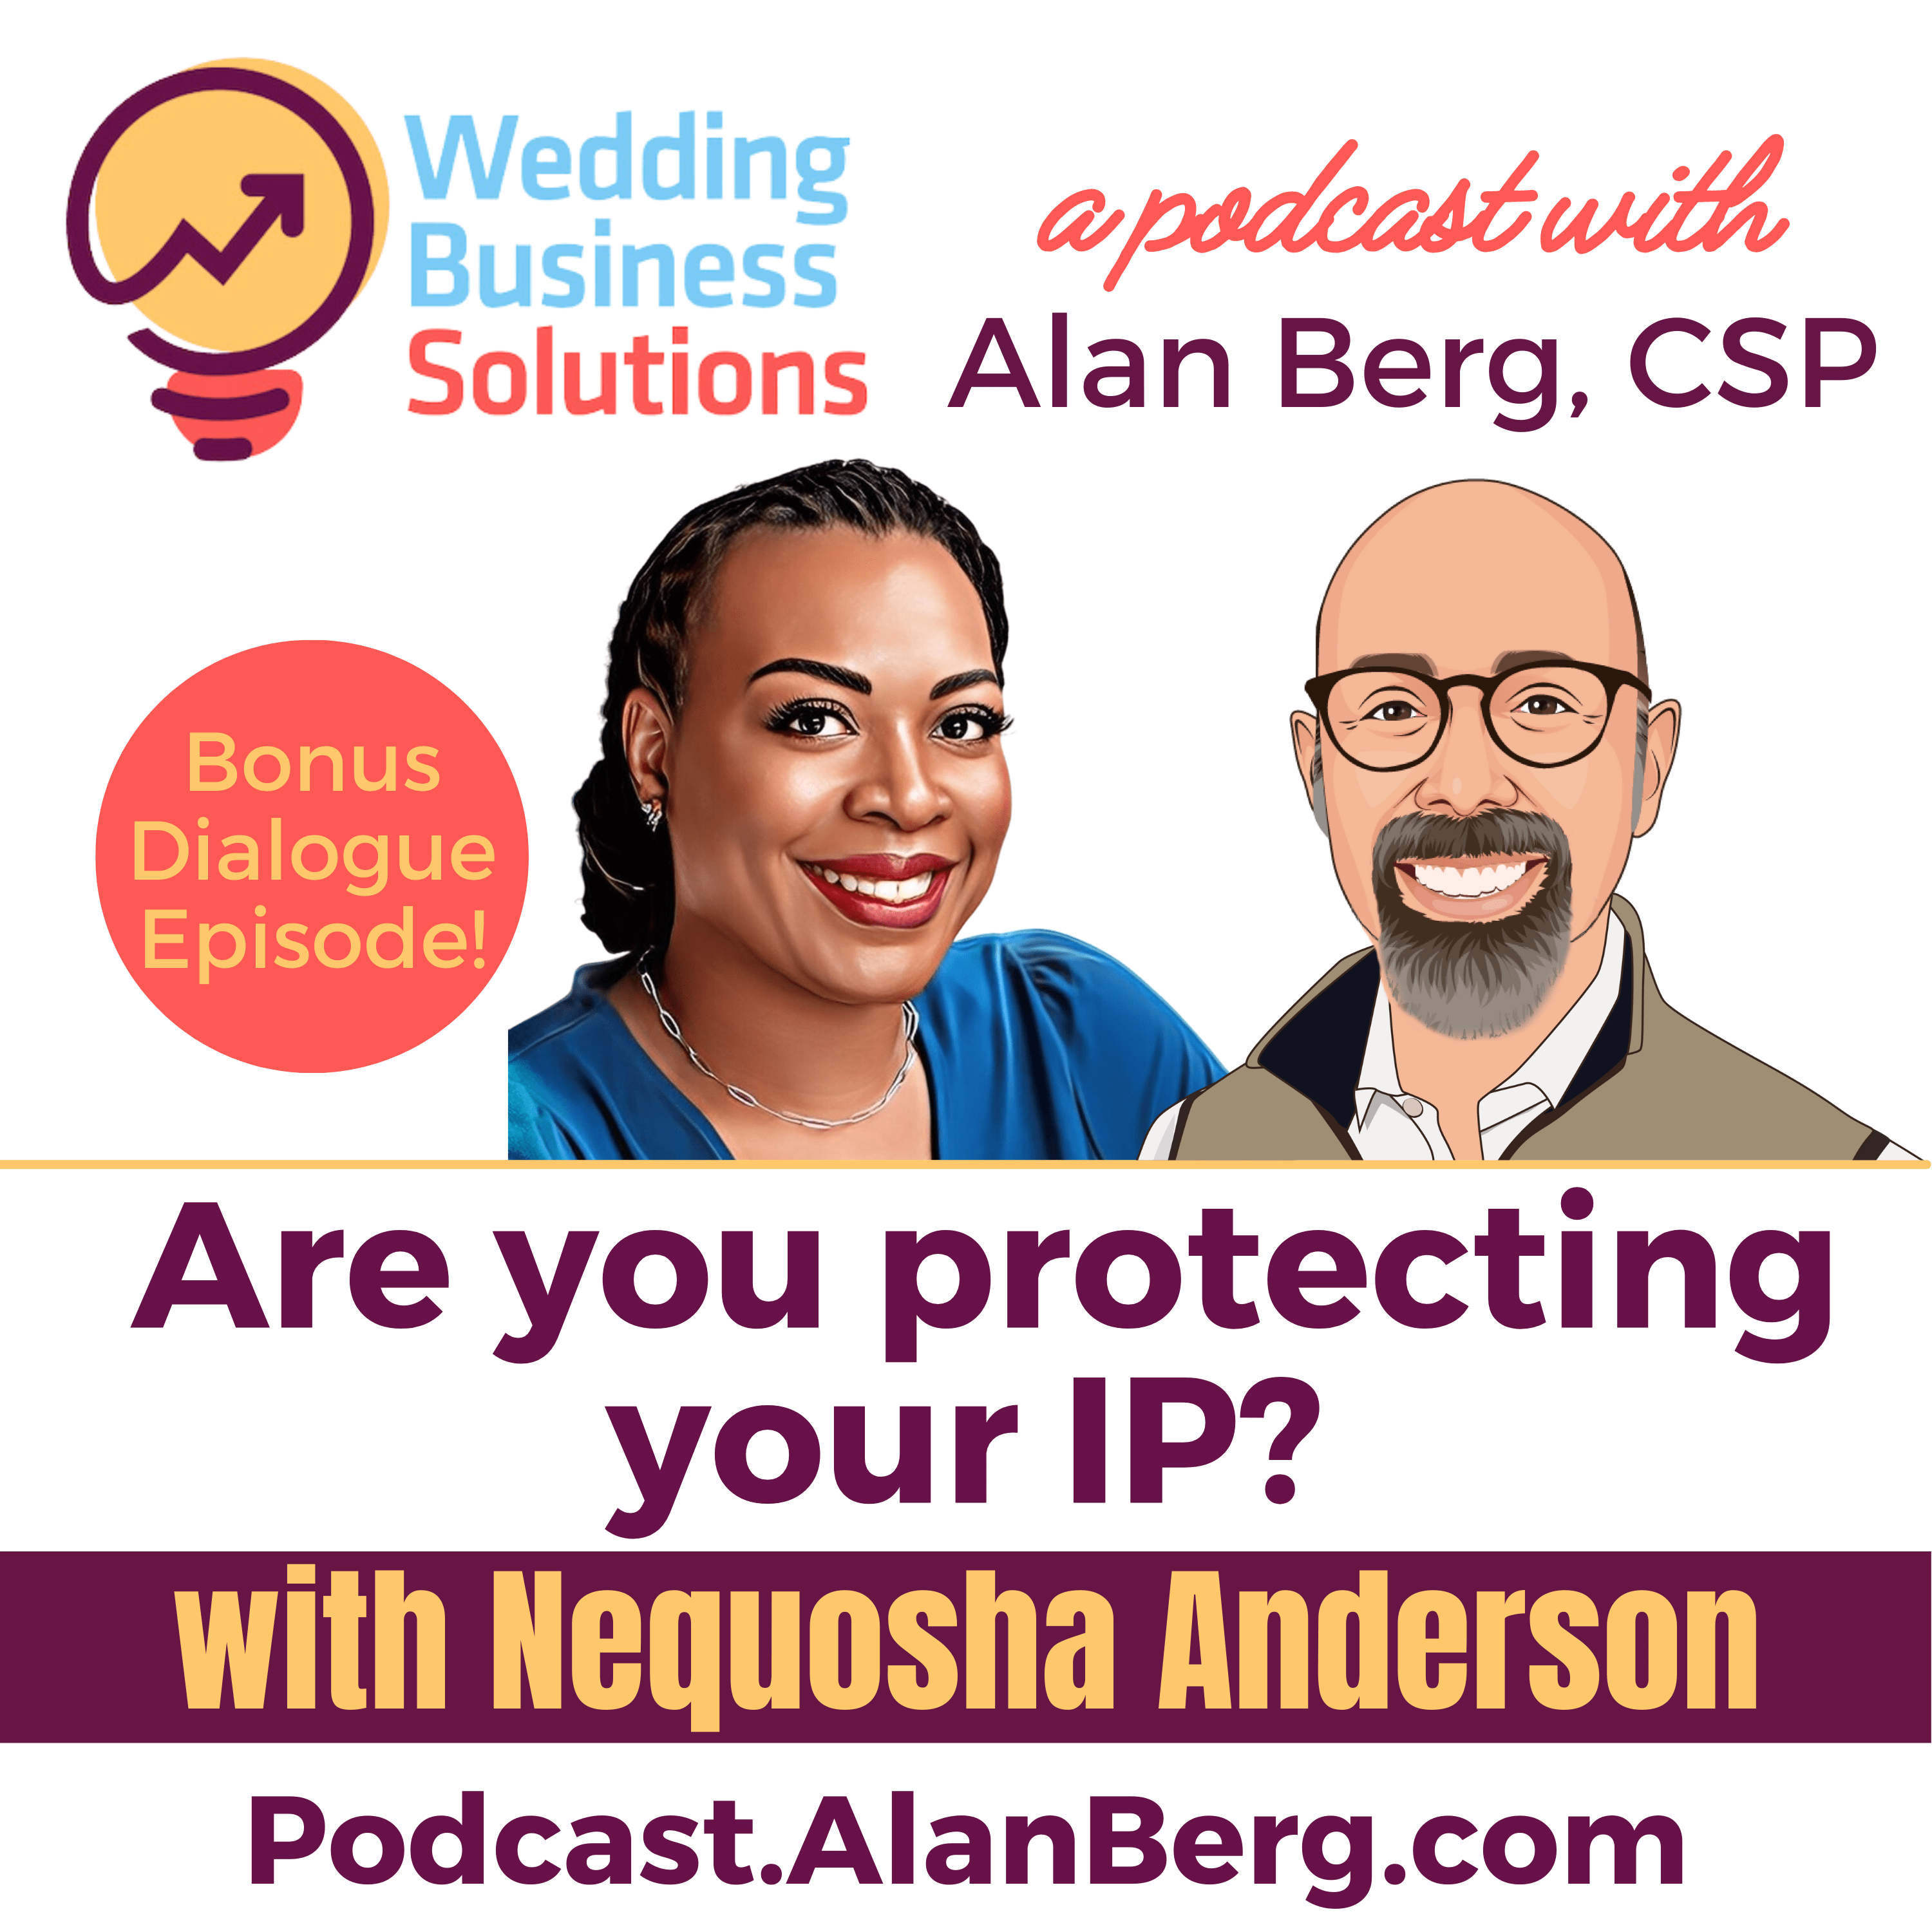 Nequosha Anderson - Are you protecting your IP? - Alan Berg CSP, Wedding Business Solutions Podcast